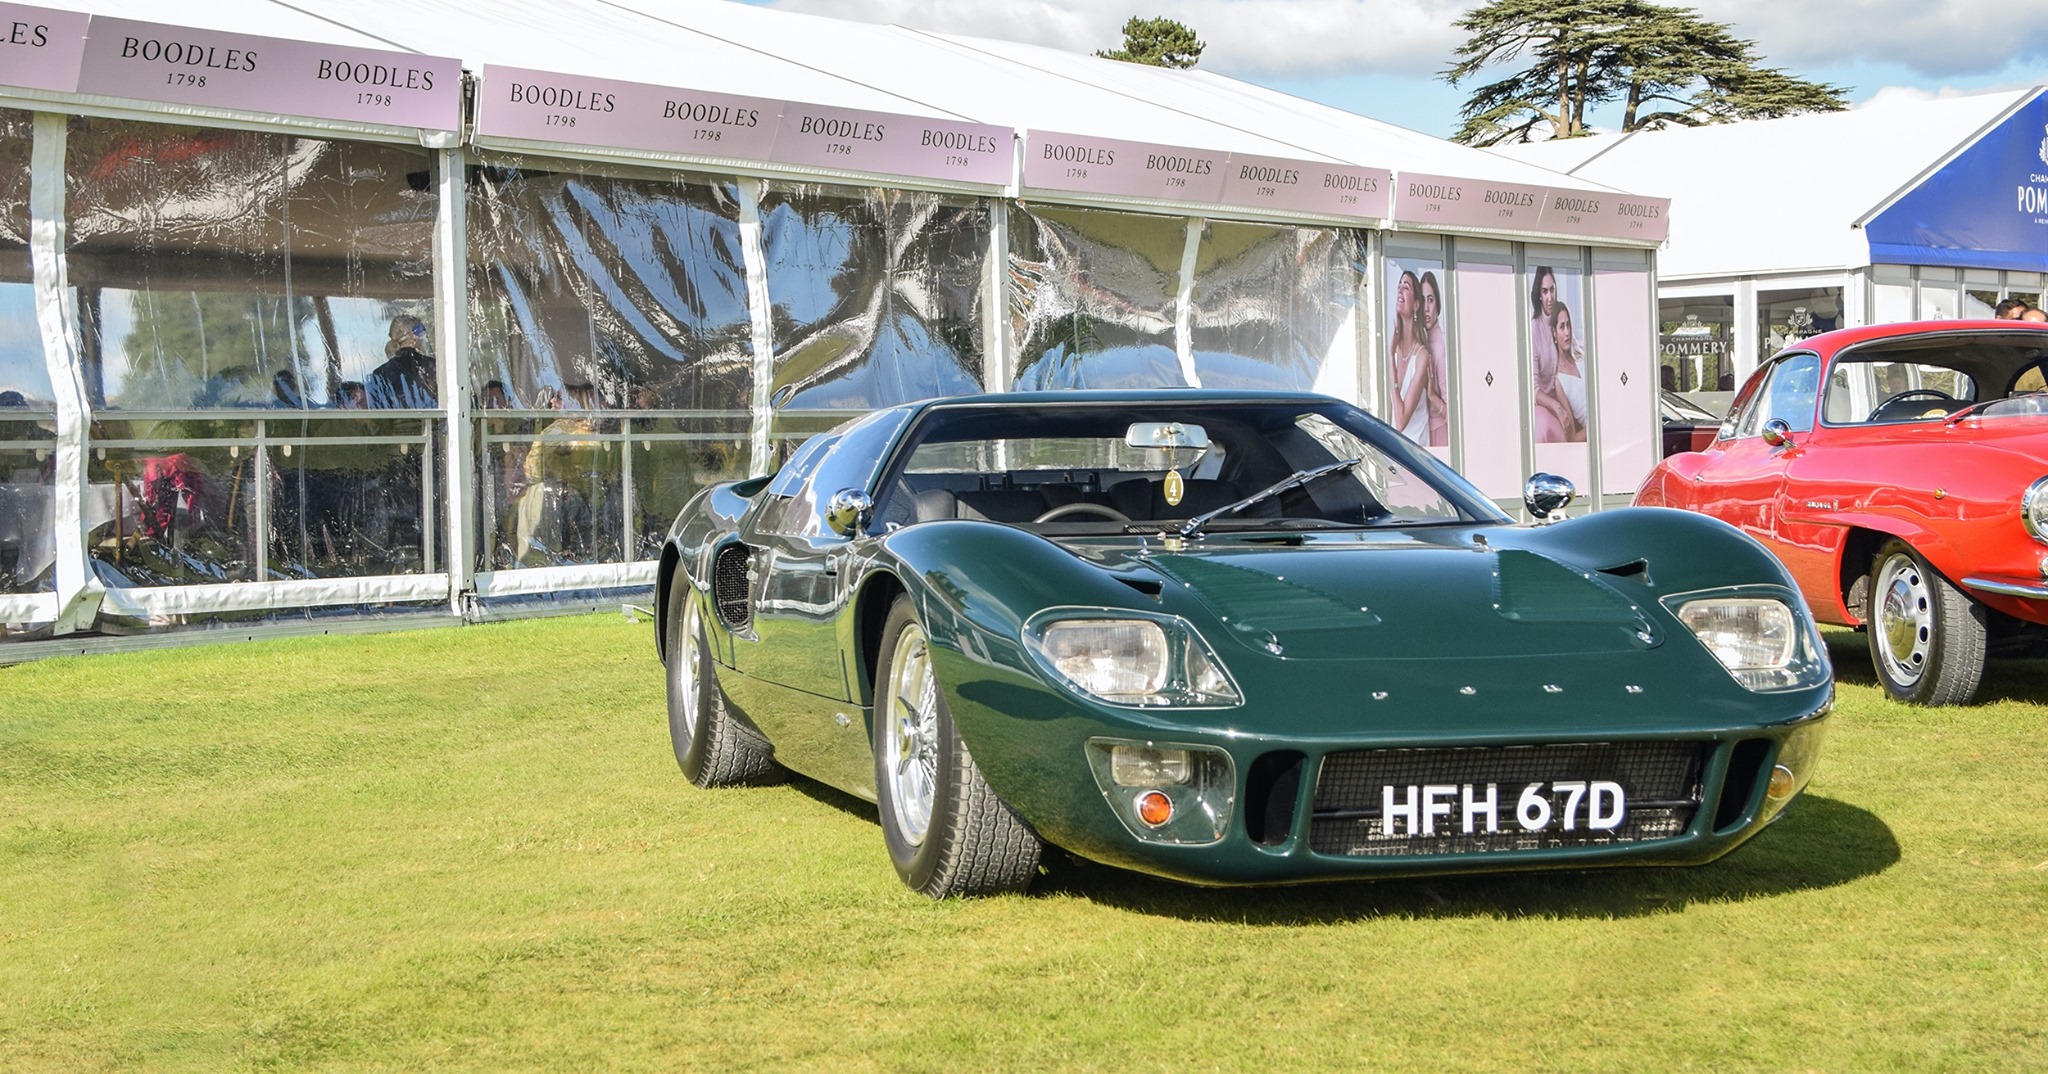 salonprive_classic Concours of Elegance 2020